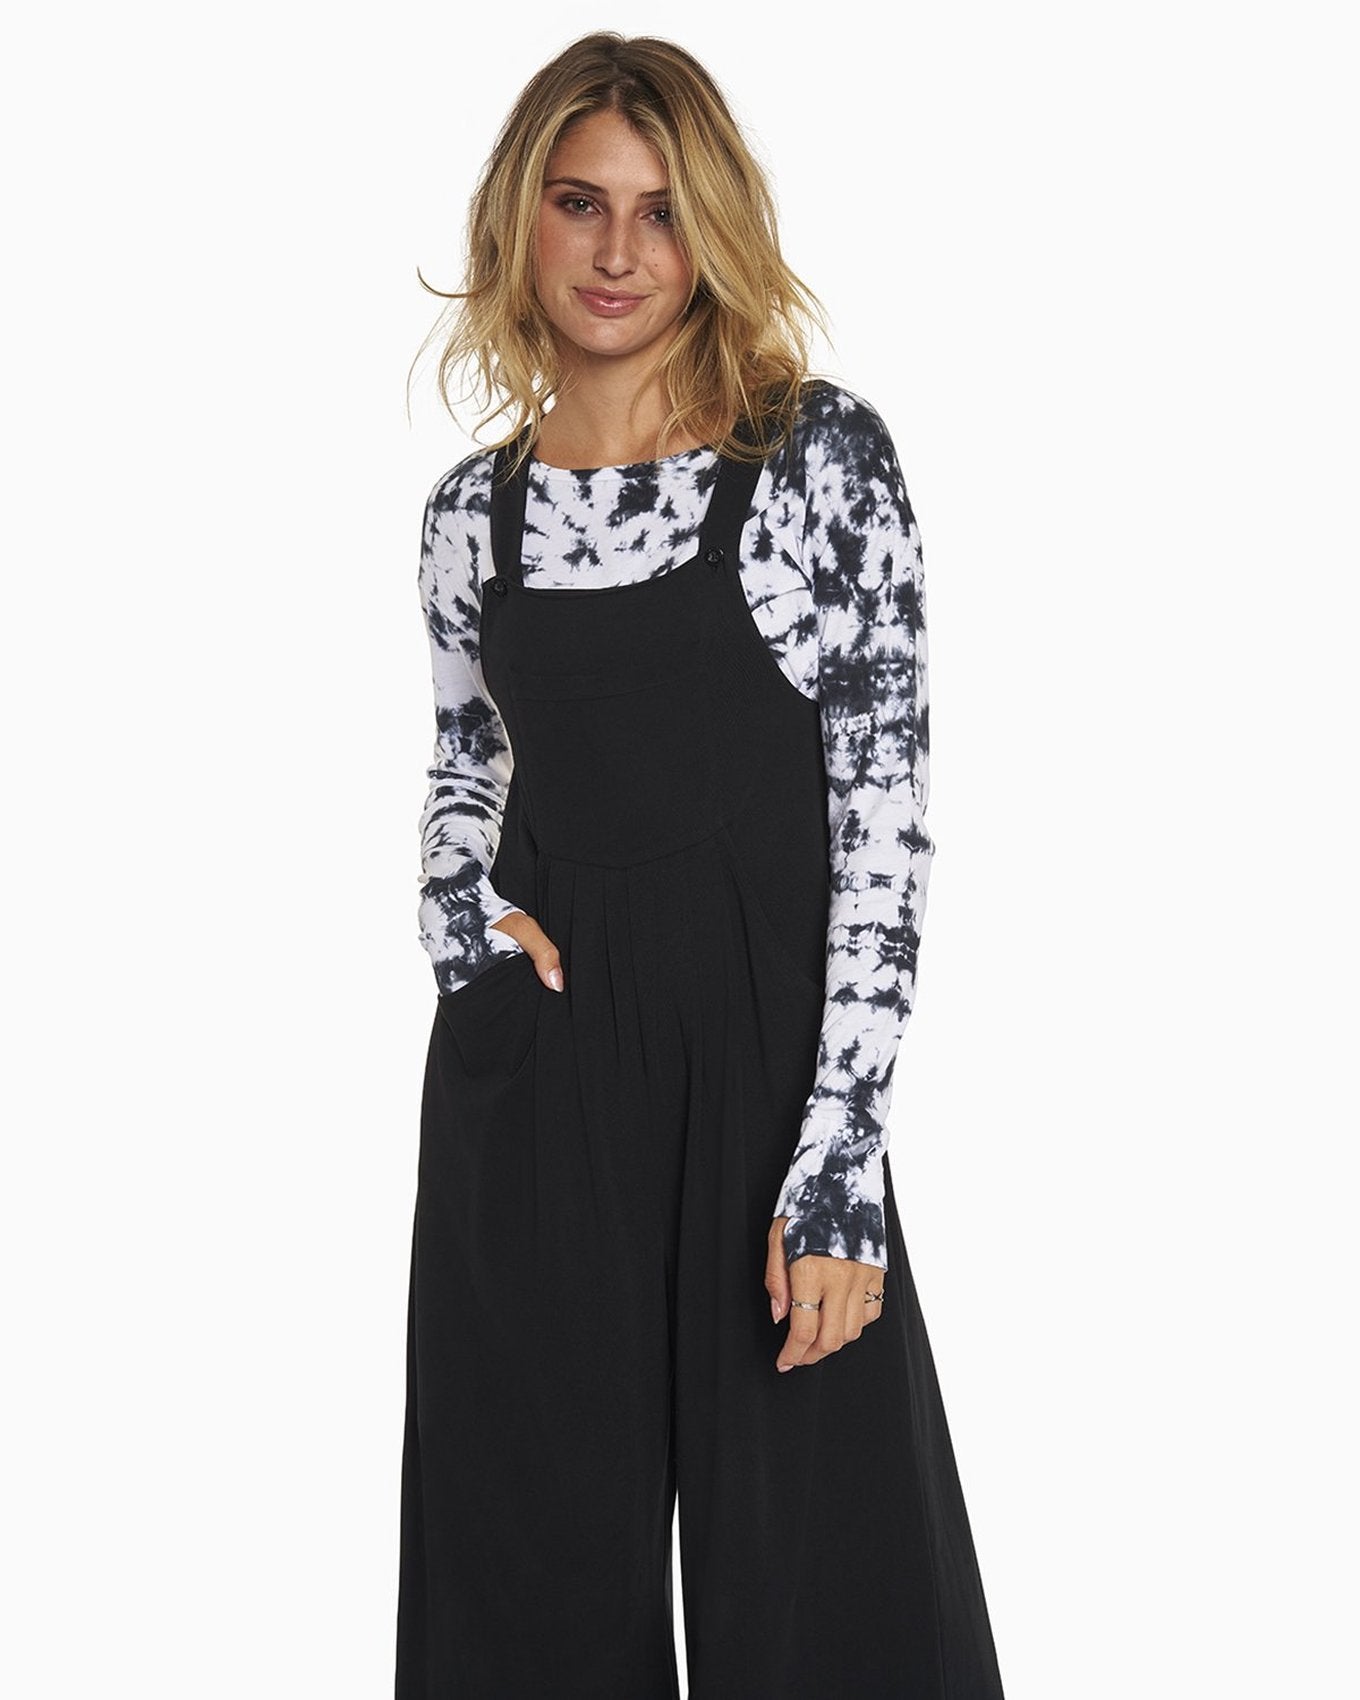 YesAnd Organic Knit Overalls Knit Overalls in color Jet Black and shape jumpsuit